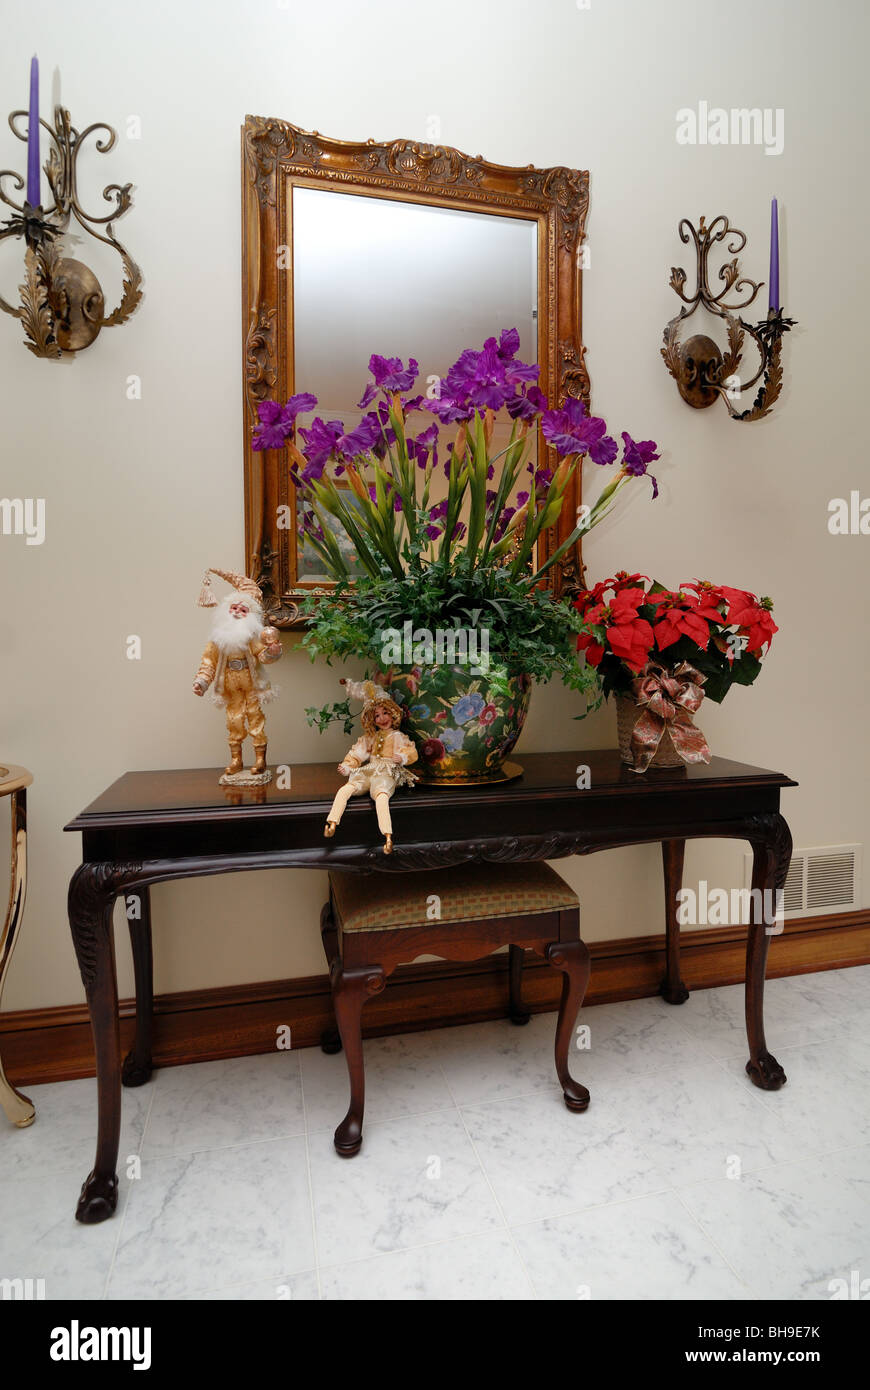 A tasteful hallway table and mirror, decorated for the holiday season. Stock Photo